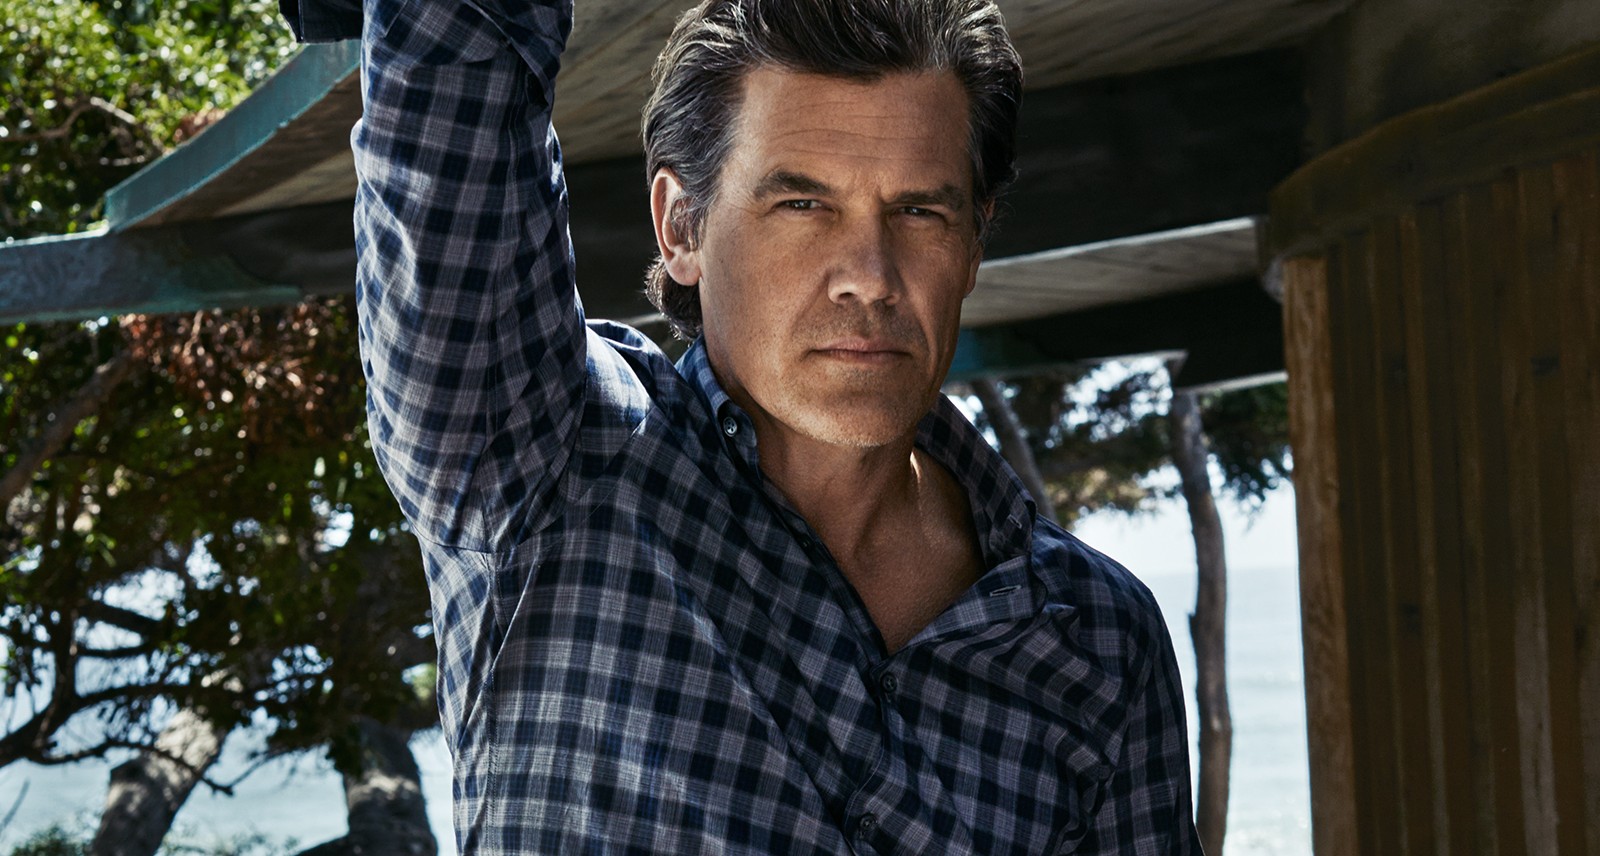 Josh Brolin's Massive Gains: How the Actor Smashed Through His Comfort Zone to Play Thanos and Cable